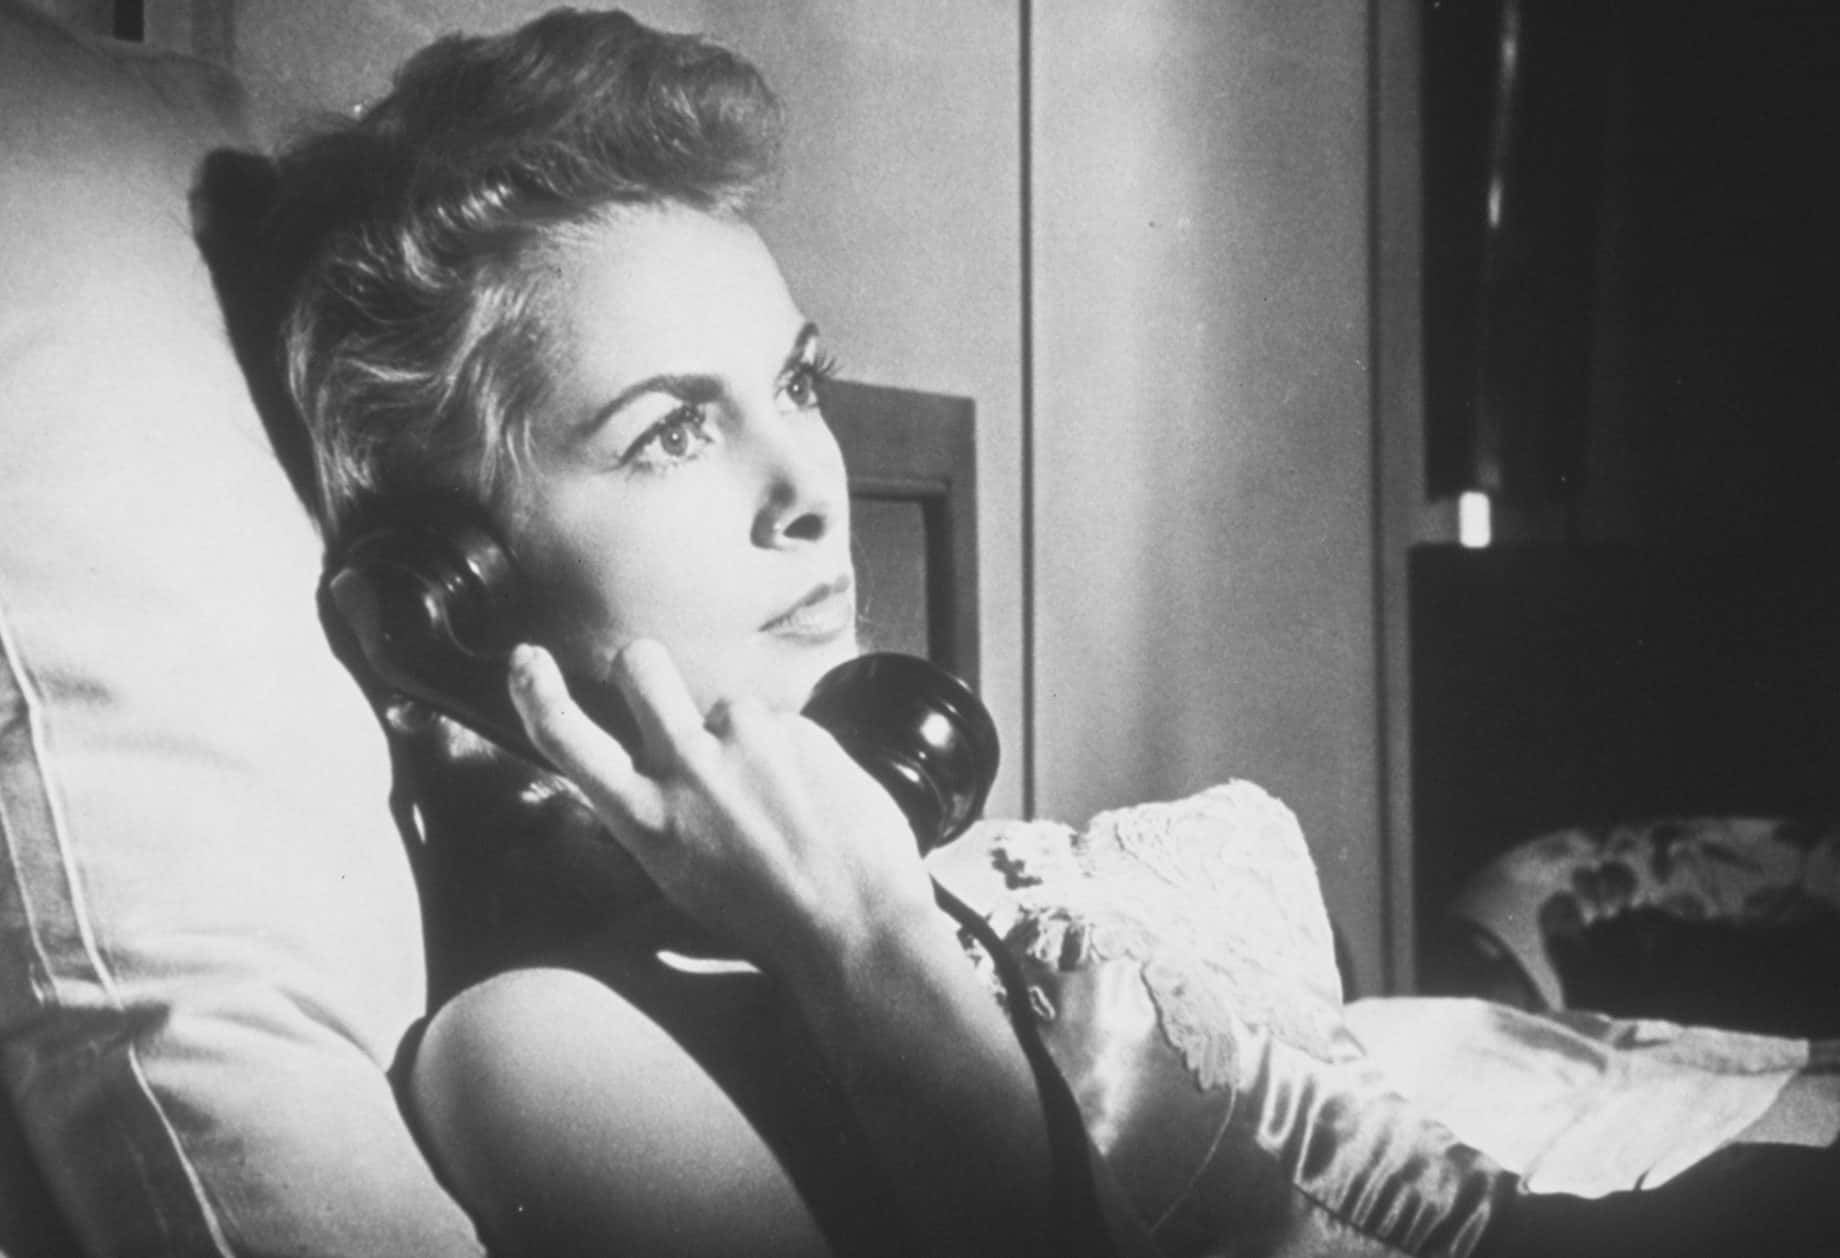 Janet Leigh facts